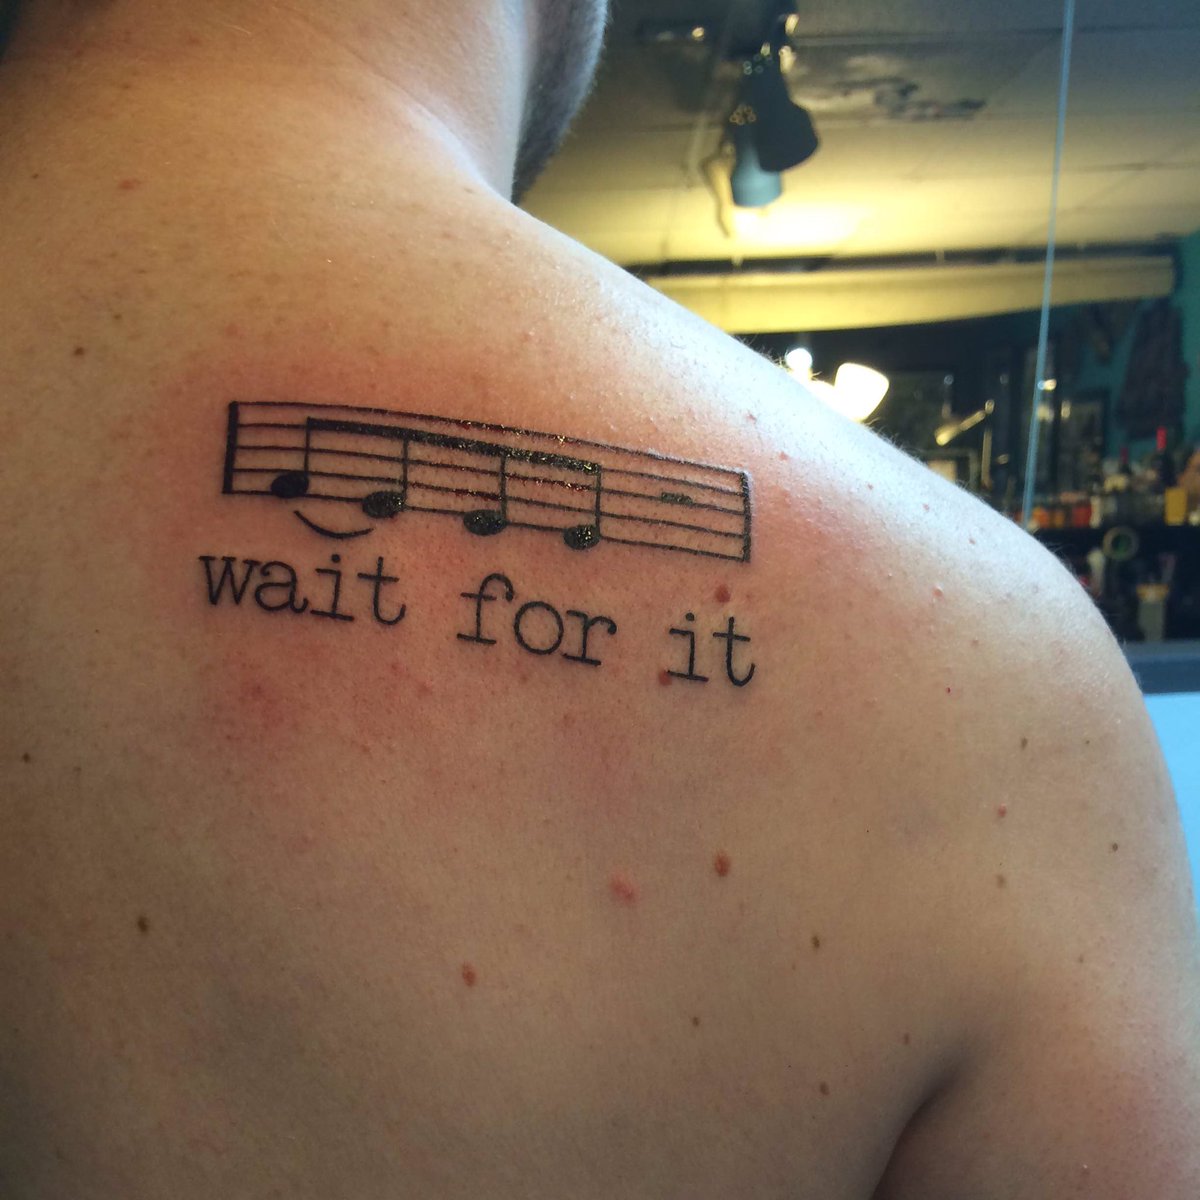 Show us your #Hamiltats! Here's @kylebnett's tattoo we mentioned in this week's episode instagram.com/p/BEGeXEKgWCr/